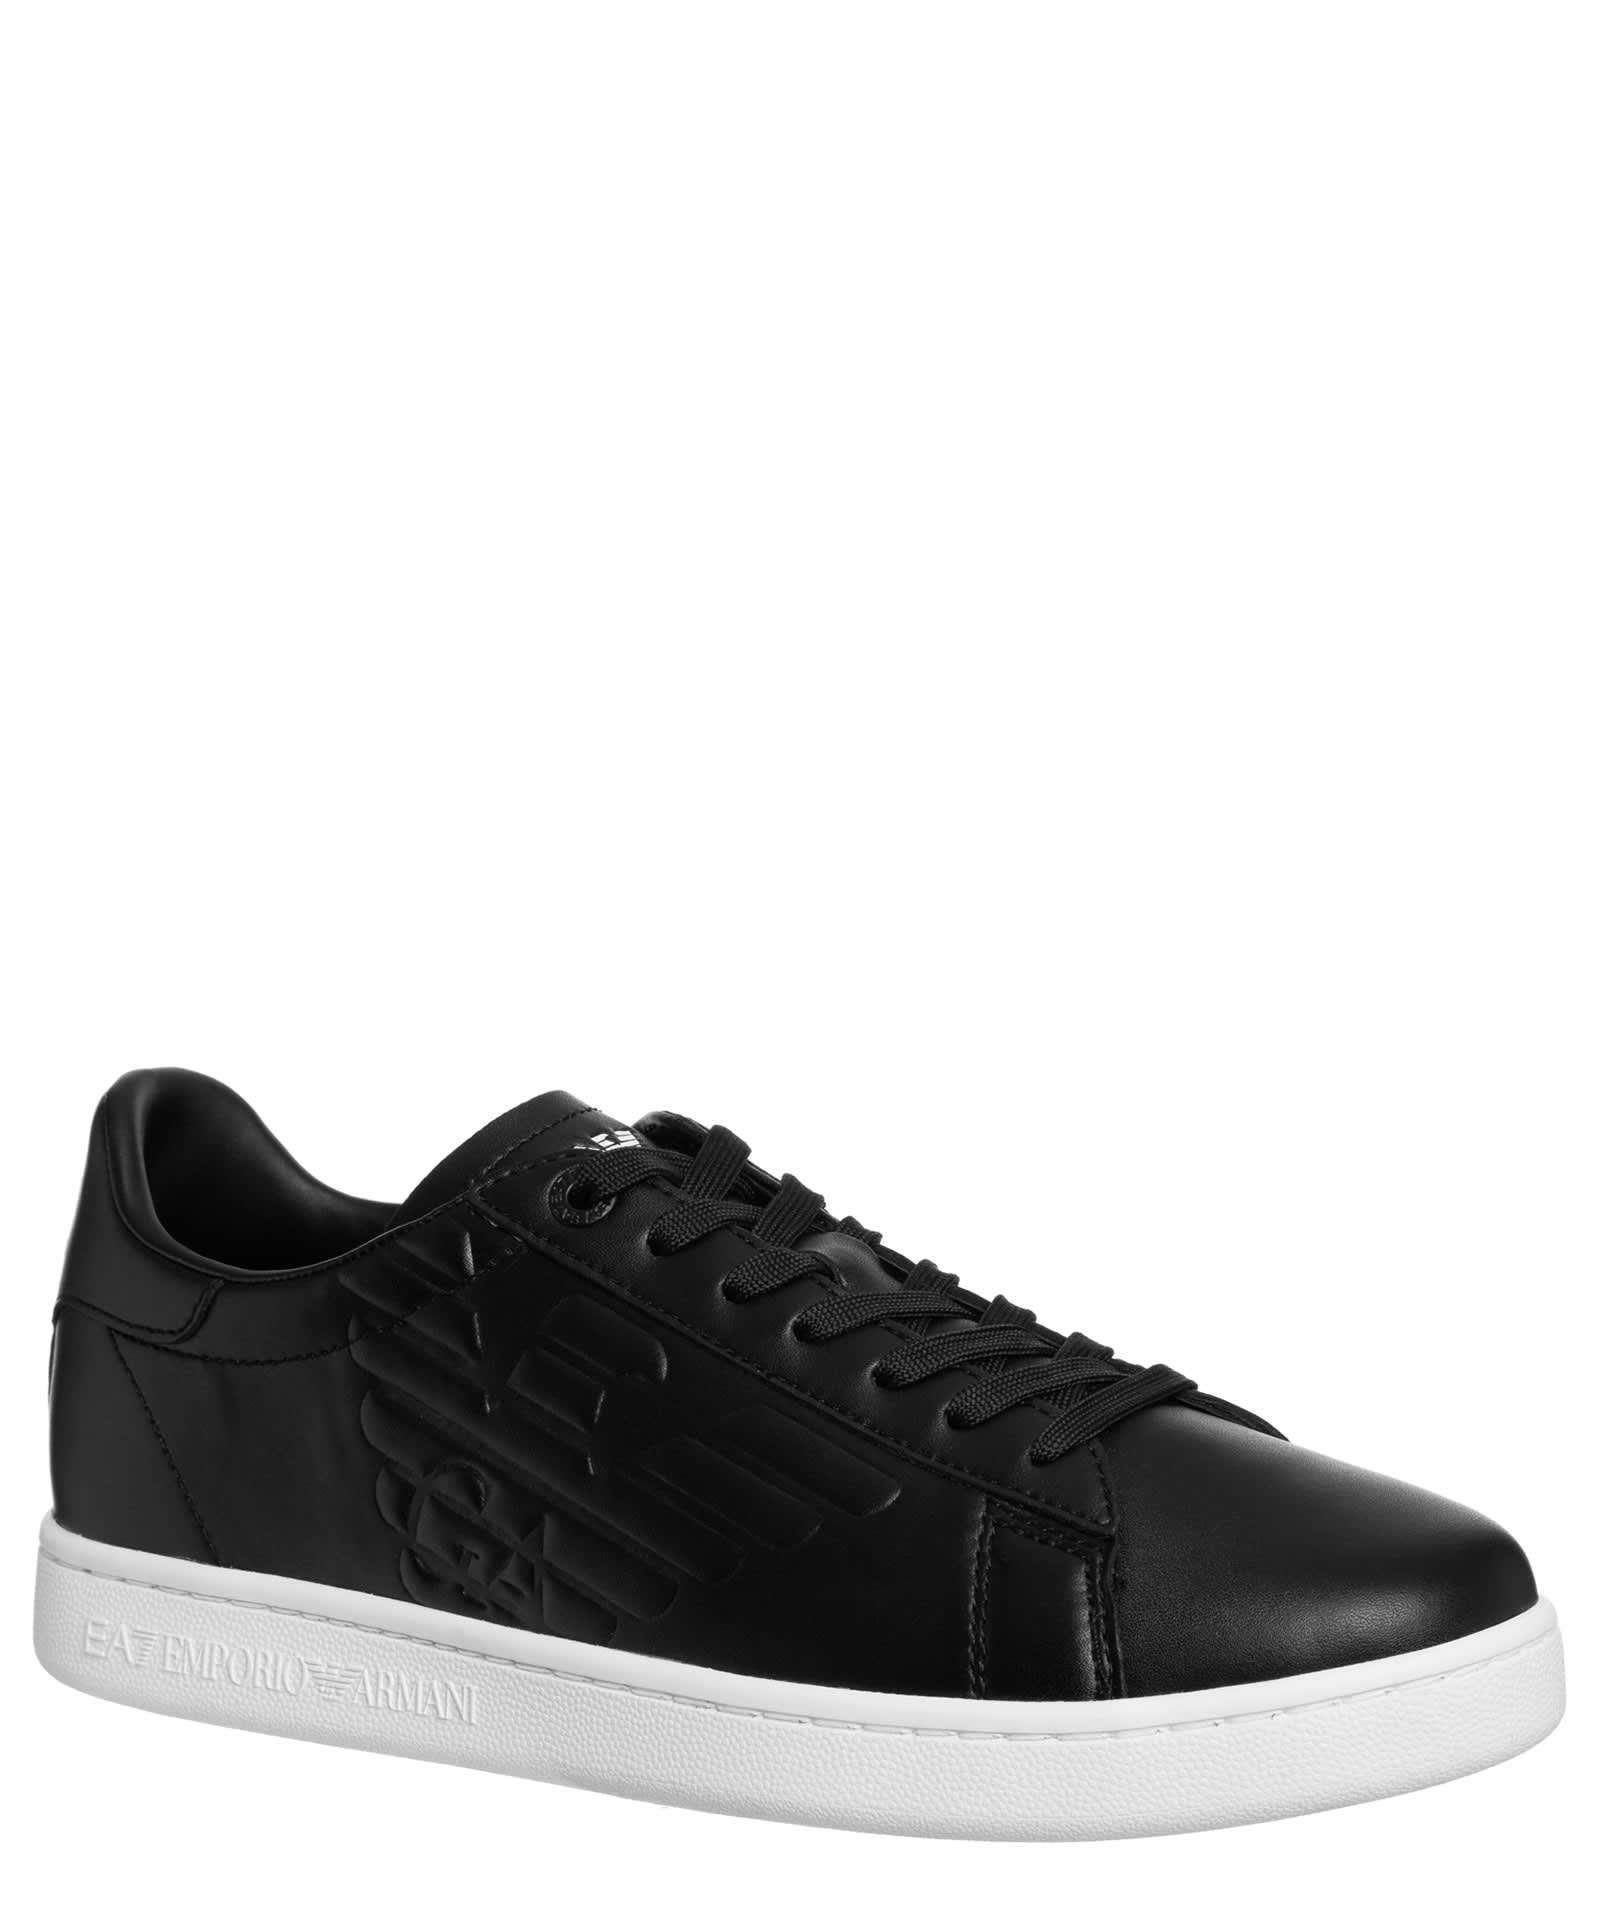 Shop Ea7 Classic Cc Leather Sneakers In Black 1